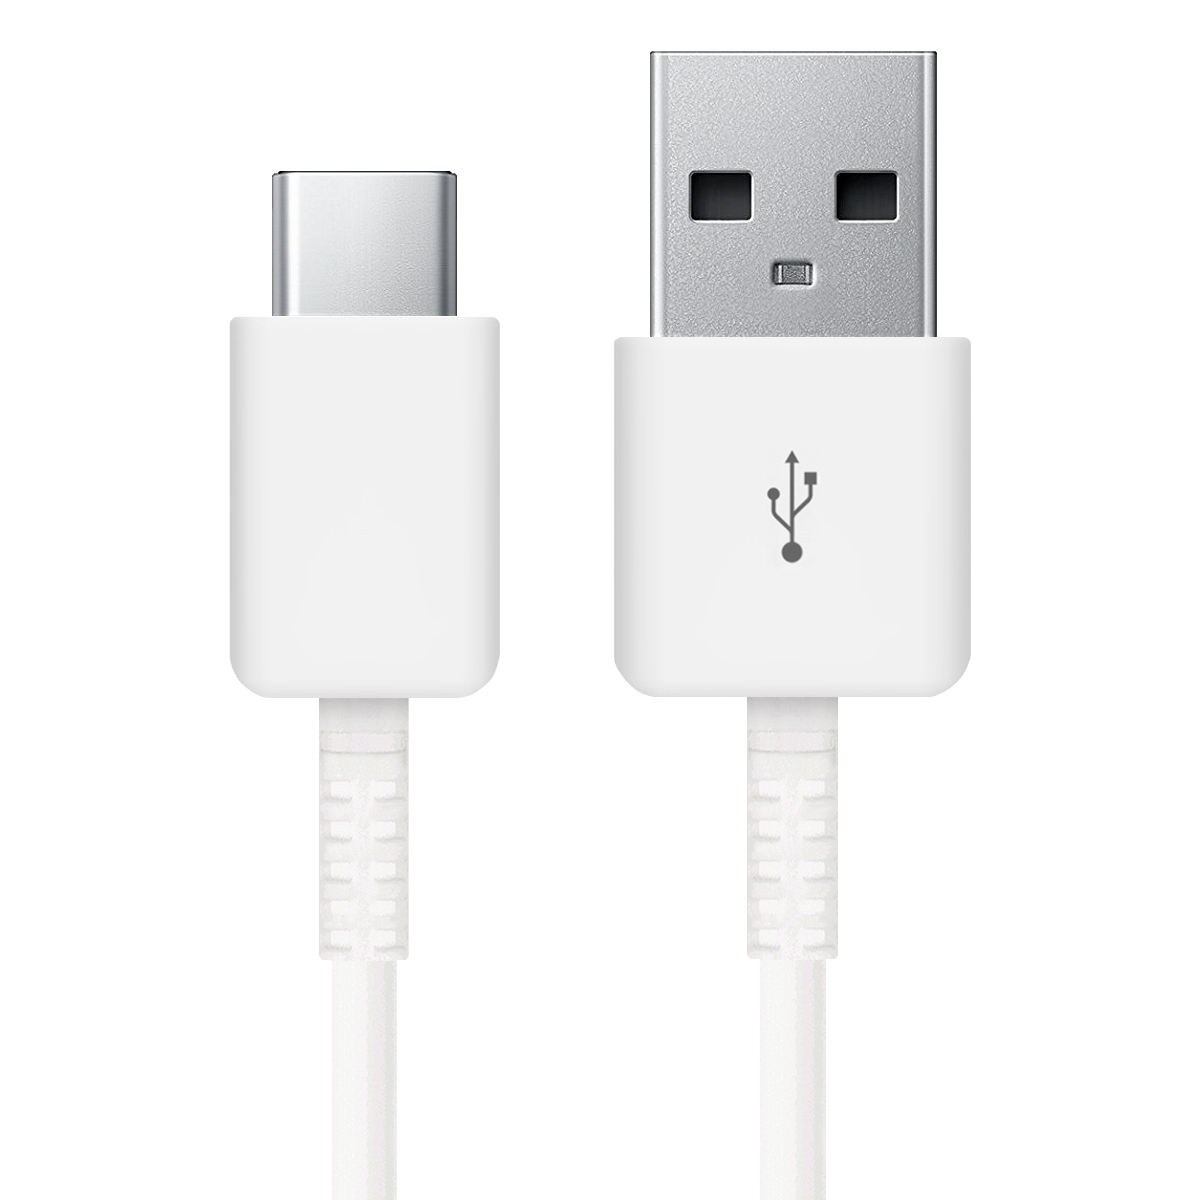 Samsung OEM Adaptive Fast Wall Charger kit with USB Type-C Cable Compatible with Samsung Galaxy S10/ S10 Plus/Note 8/ Note 9/ Note 10 Lg G6 G7 G8 ThinQ V30 V40 V50 (White) - image 2 of 3